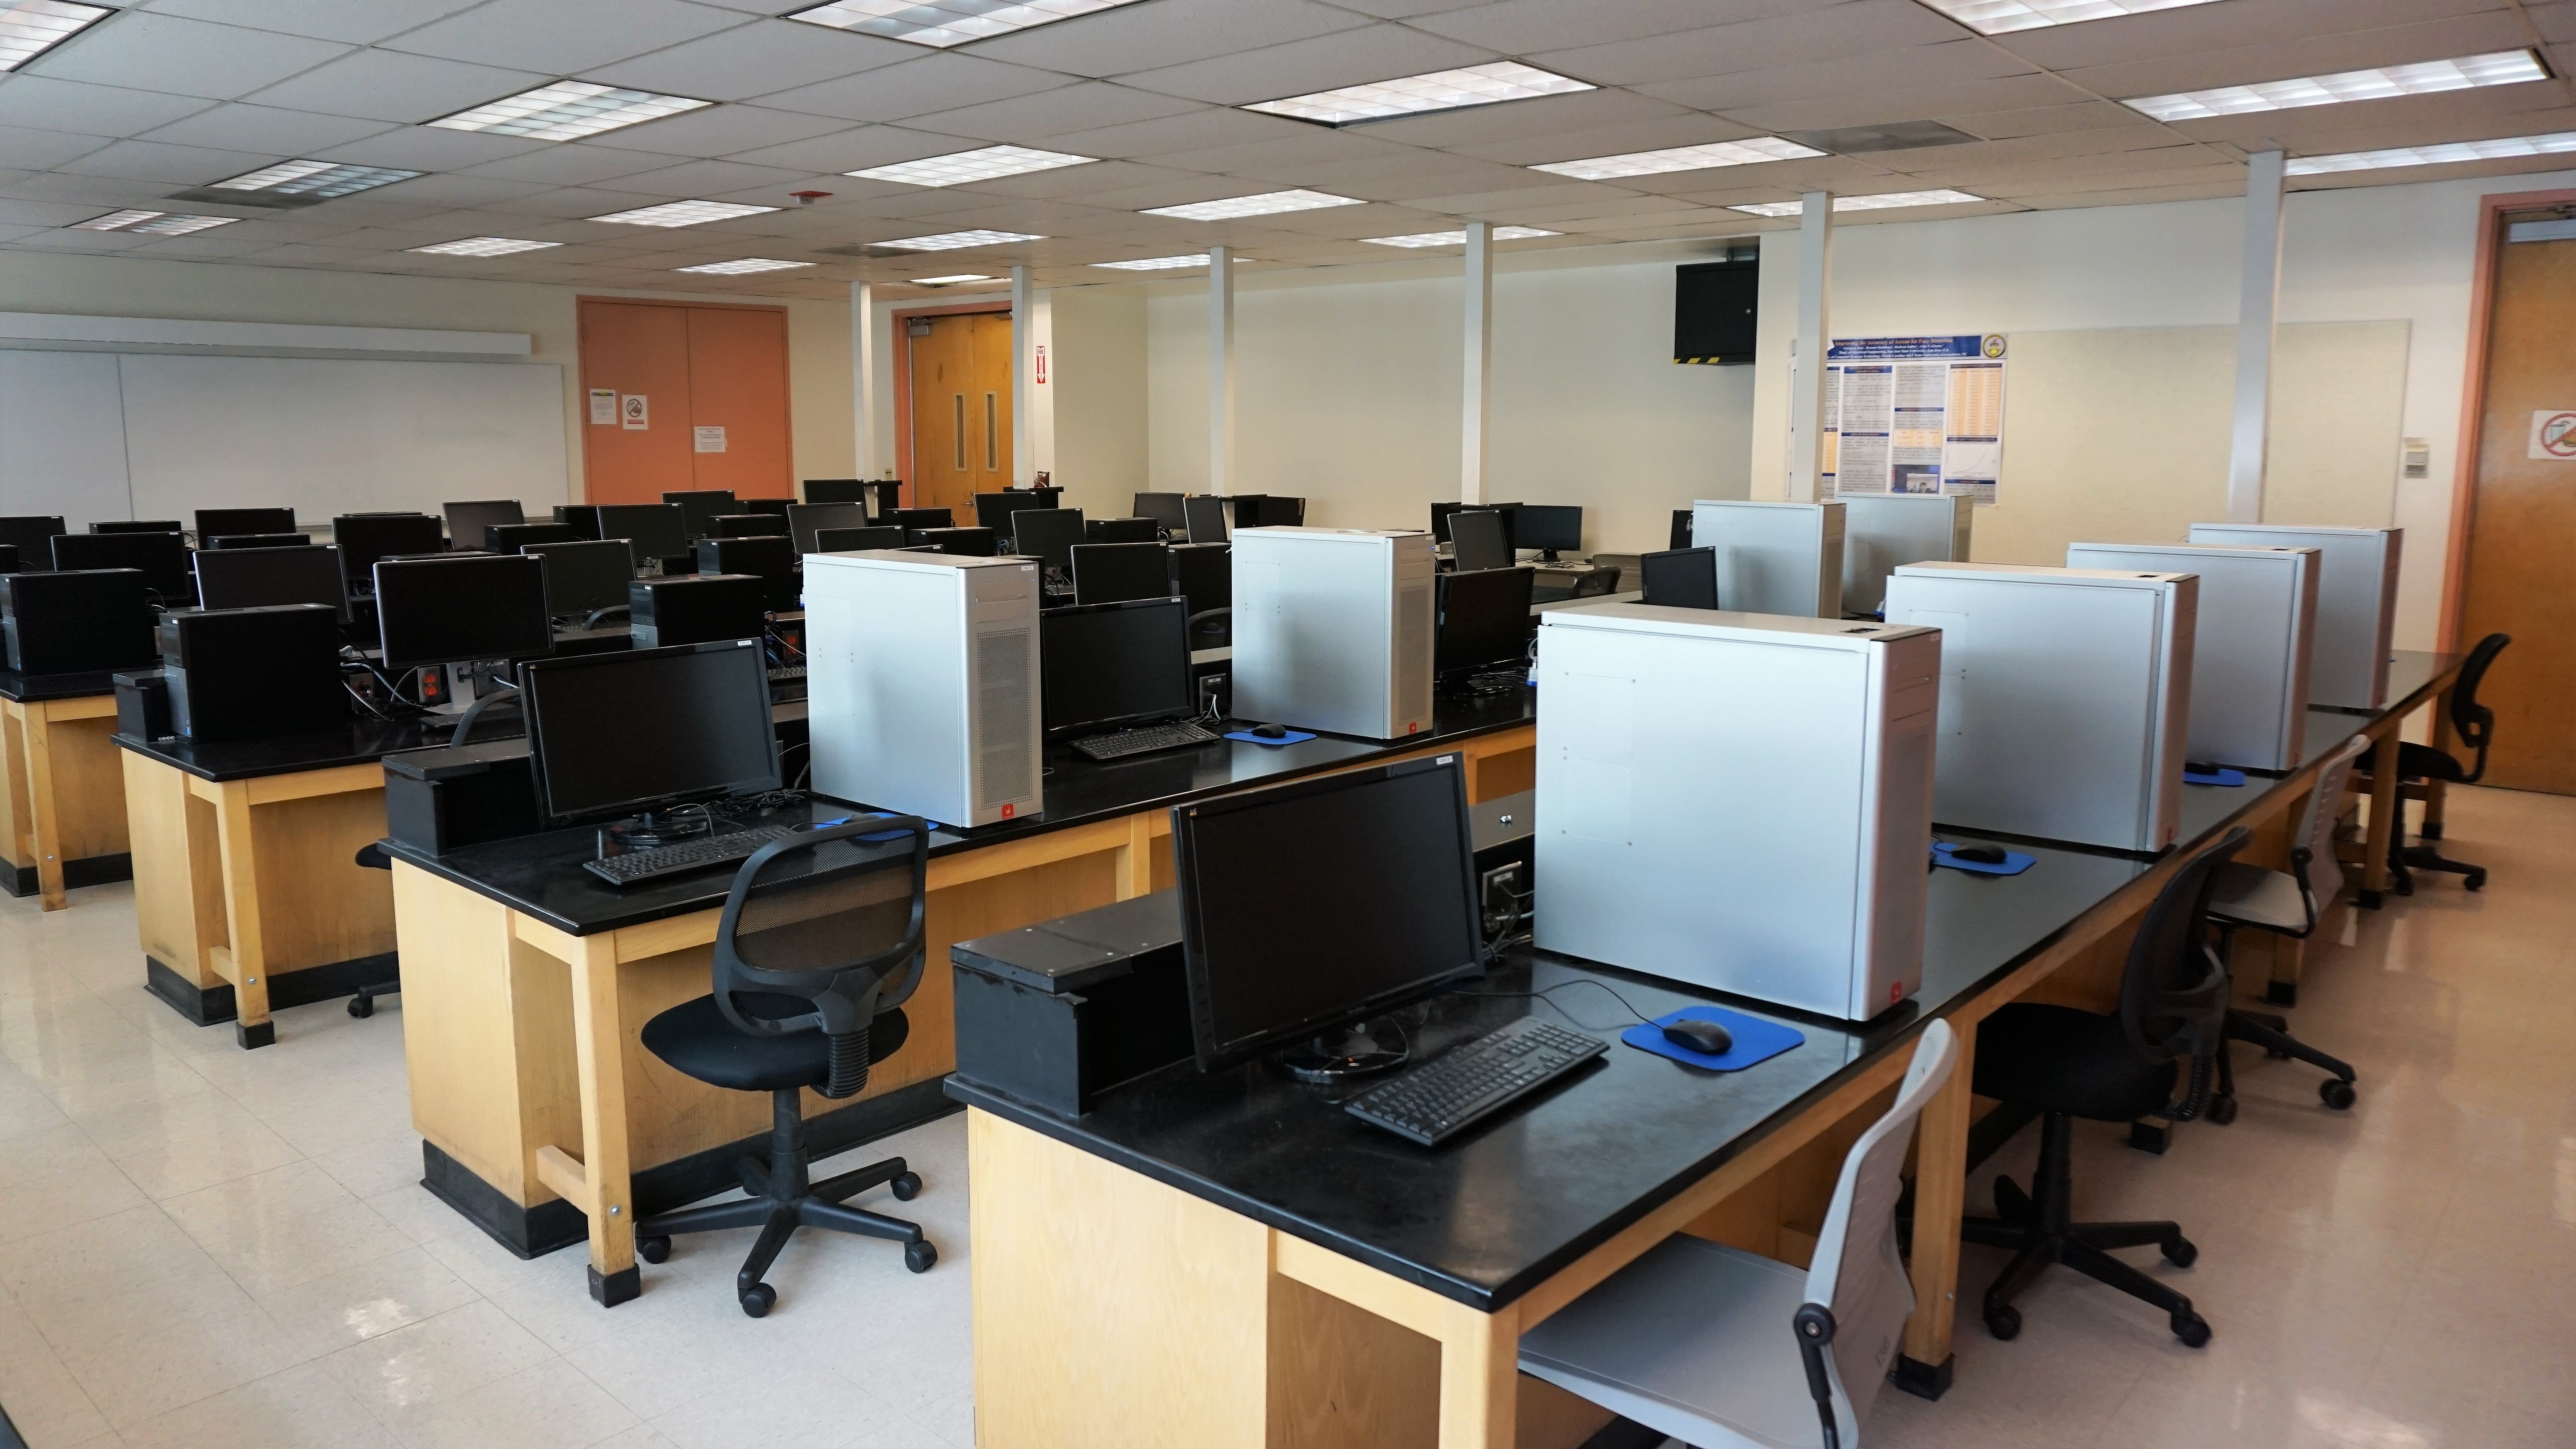 Rows of desks and monitors with large white PCs beside them.